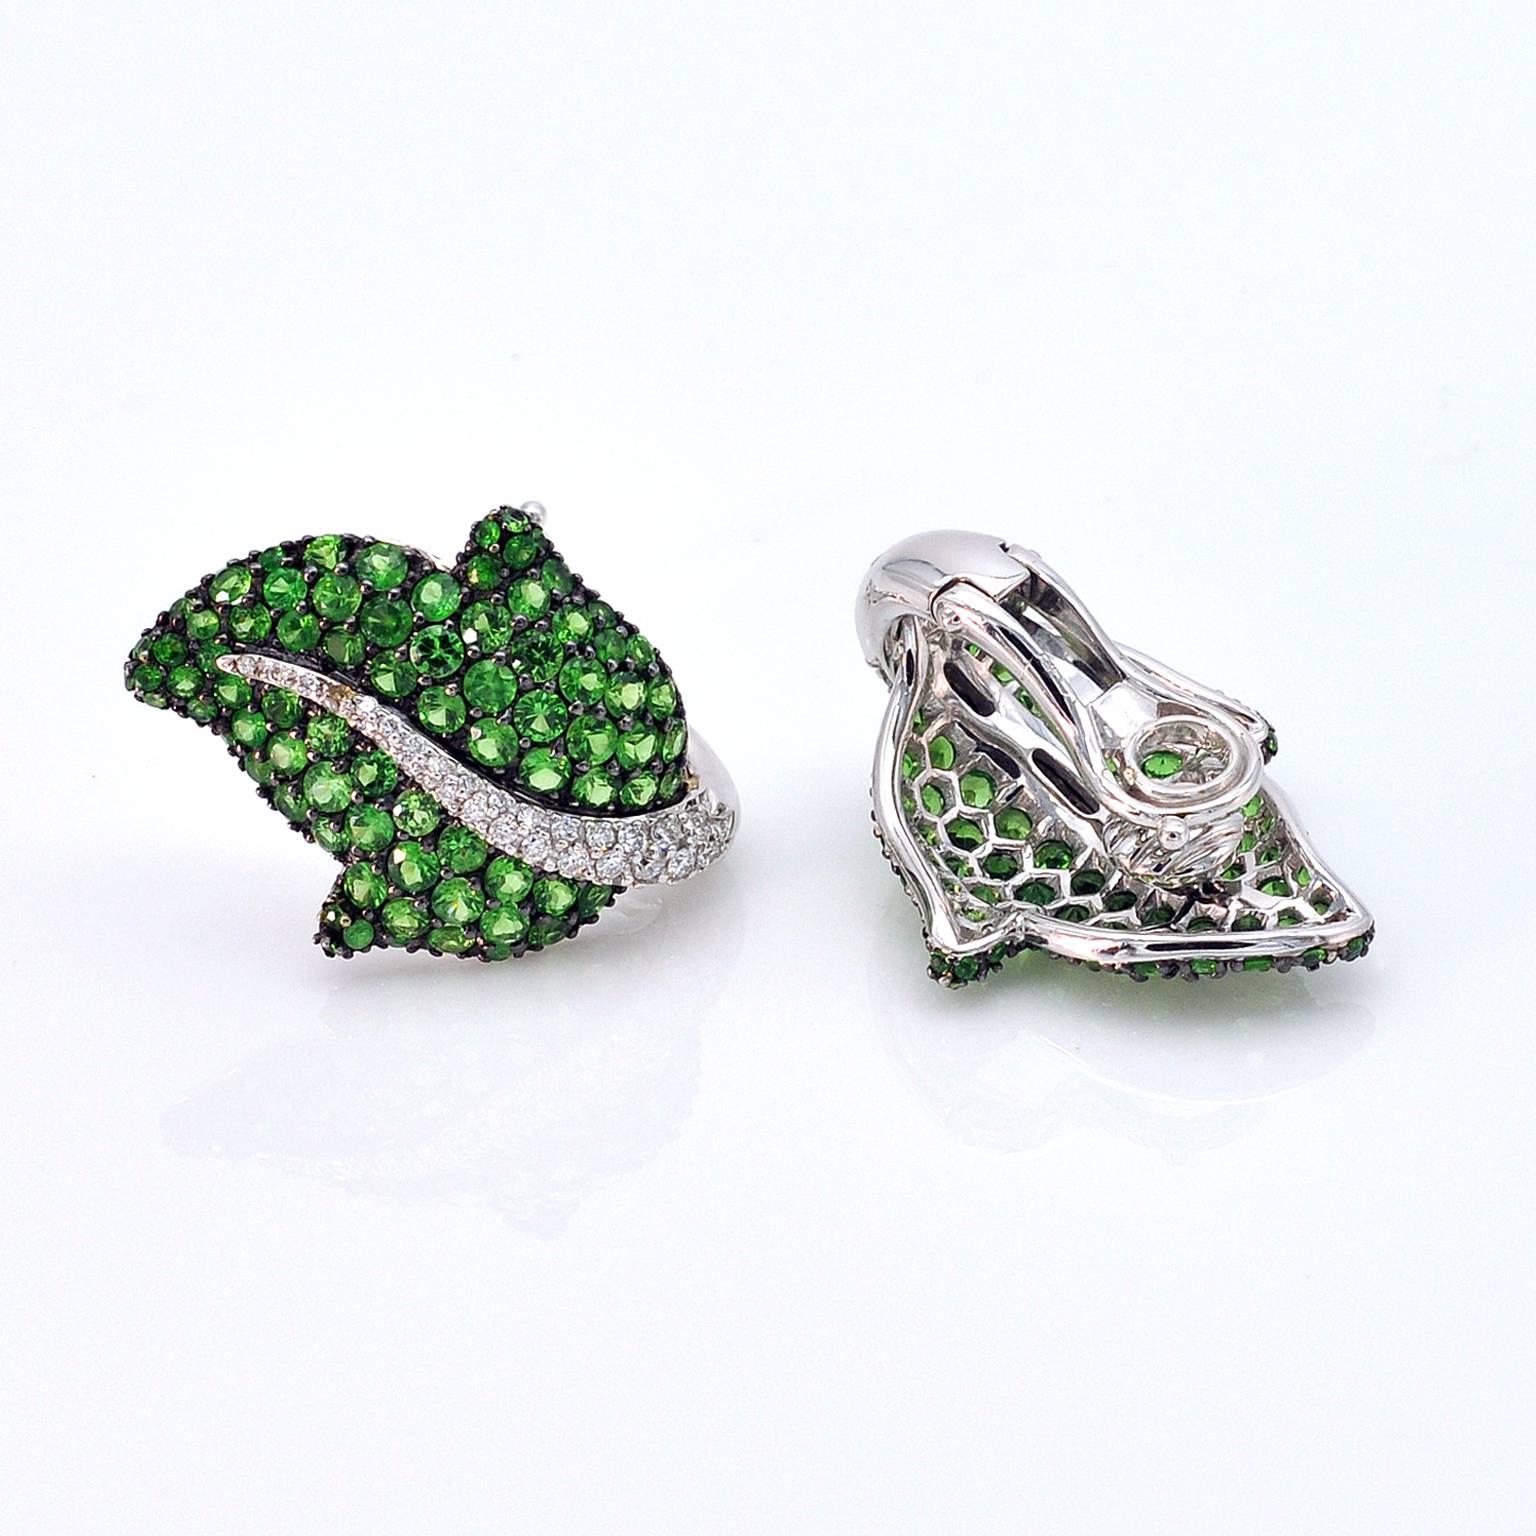 Elegant leaf shaped clip-on earrings. They have a foldable post so they can be worn both on pierced ears or not. They are set with 5.56 carats of brilliant cut vivid green tsavorites and 0.63 carat of white diamonds.
French Hallmark